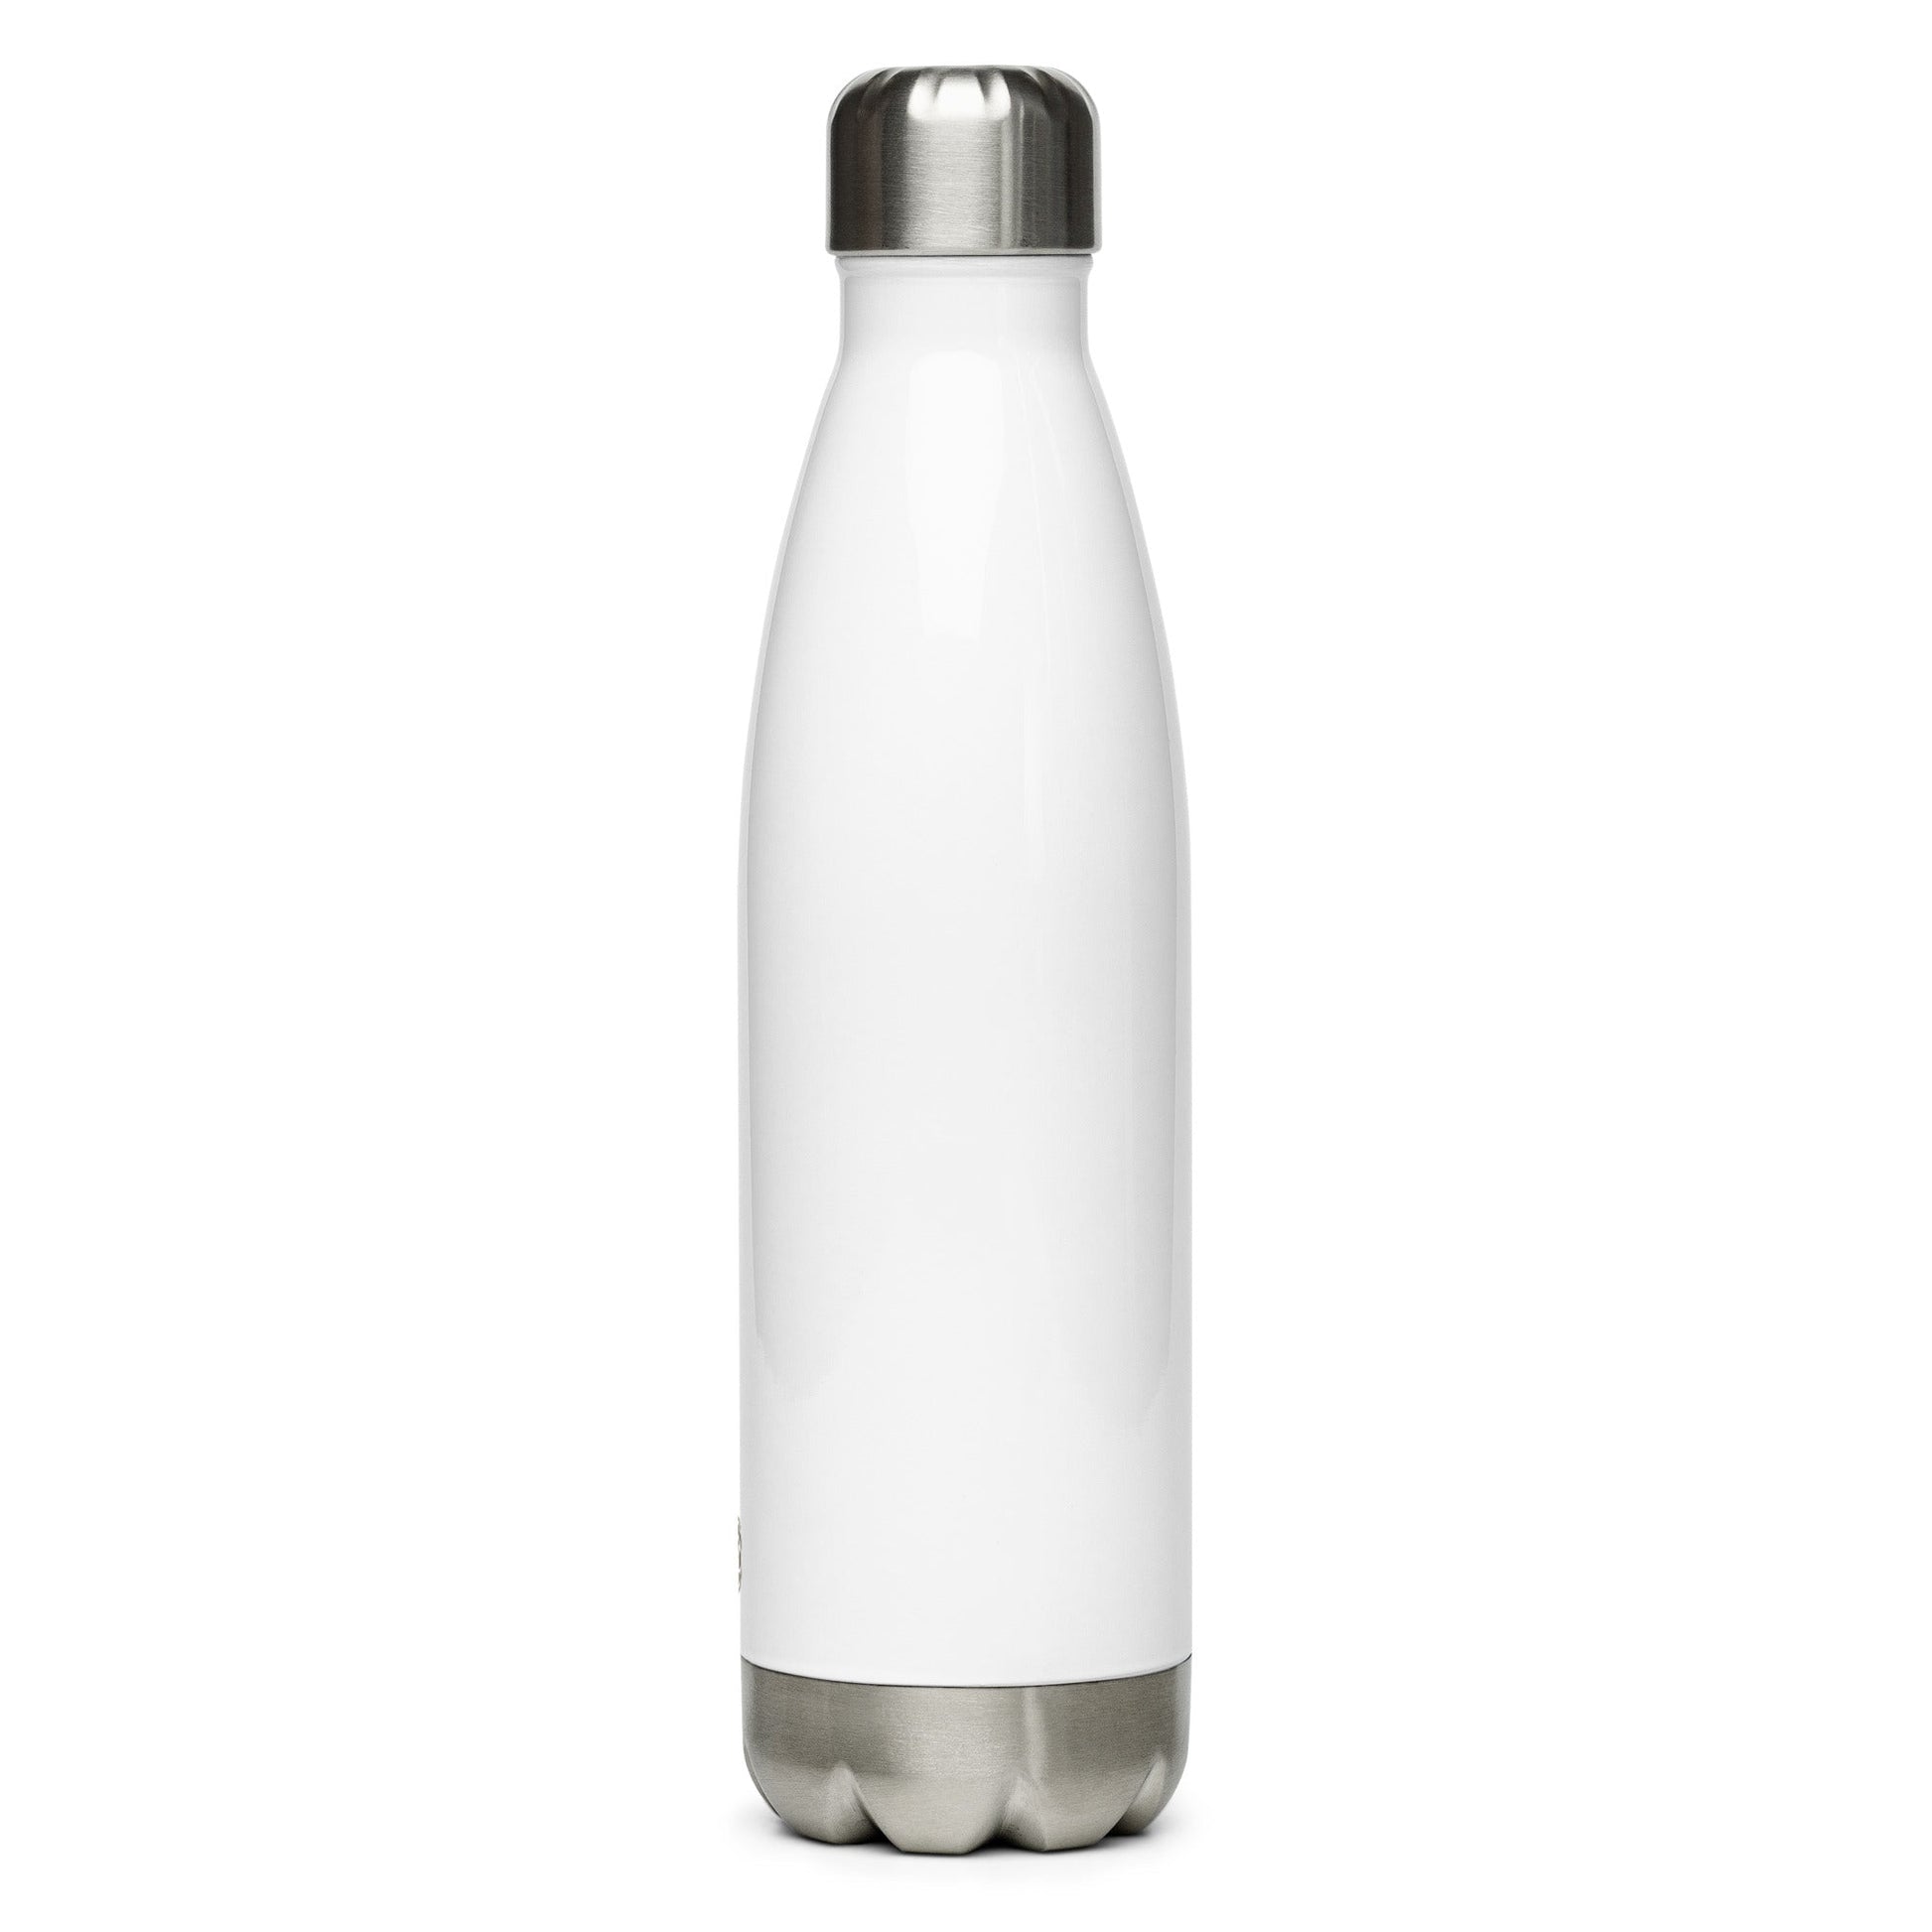 NYC Stainless Steel Hot/Cold Drink Bottle - City2CityWorld